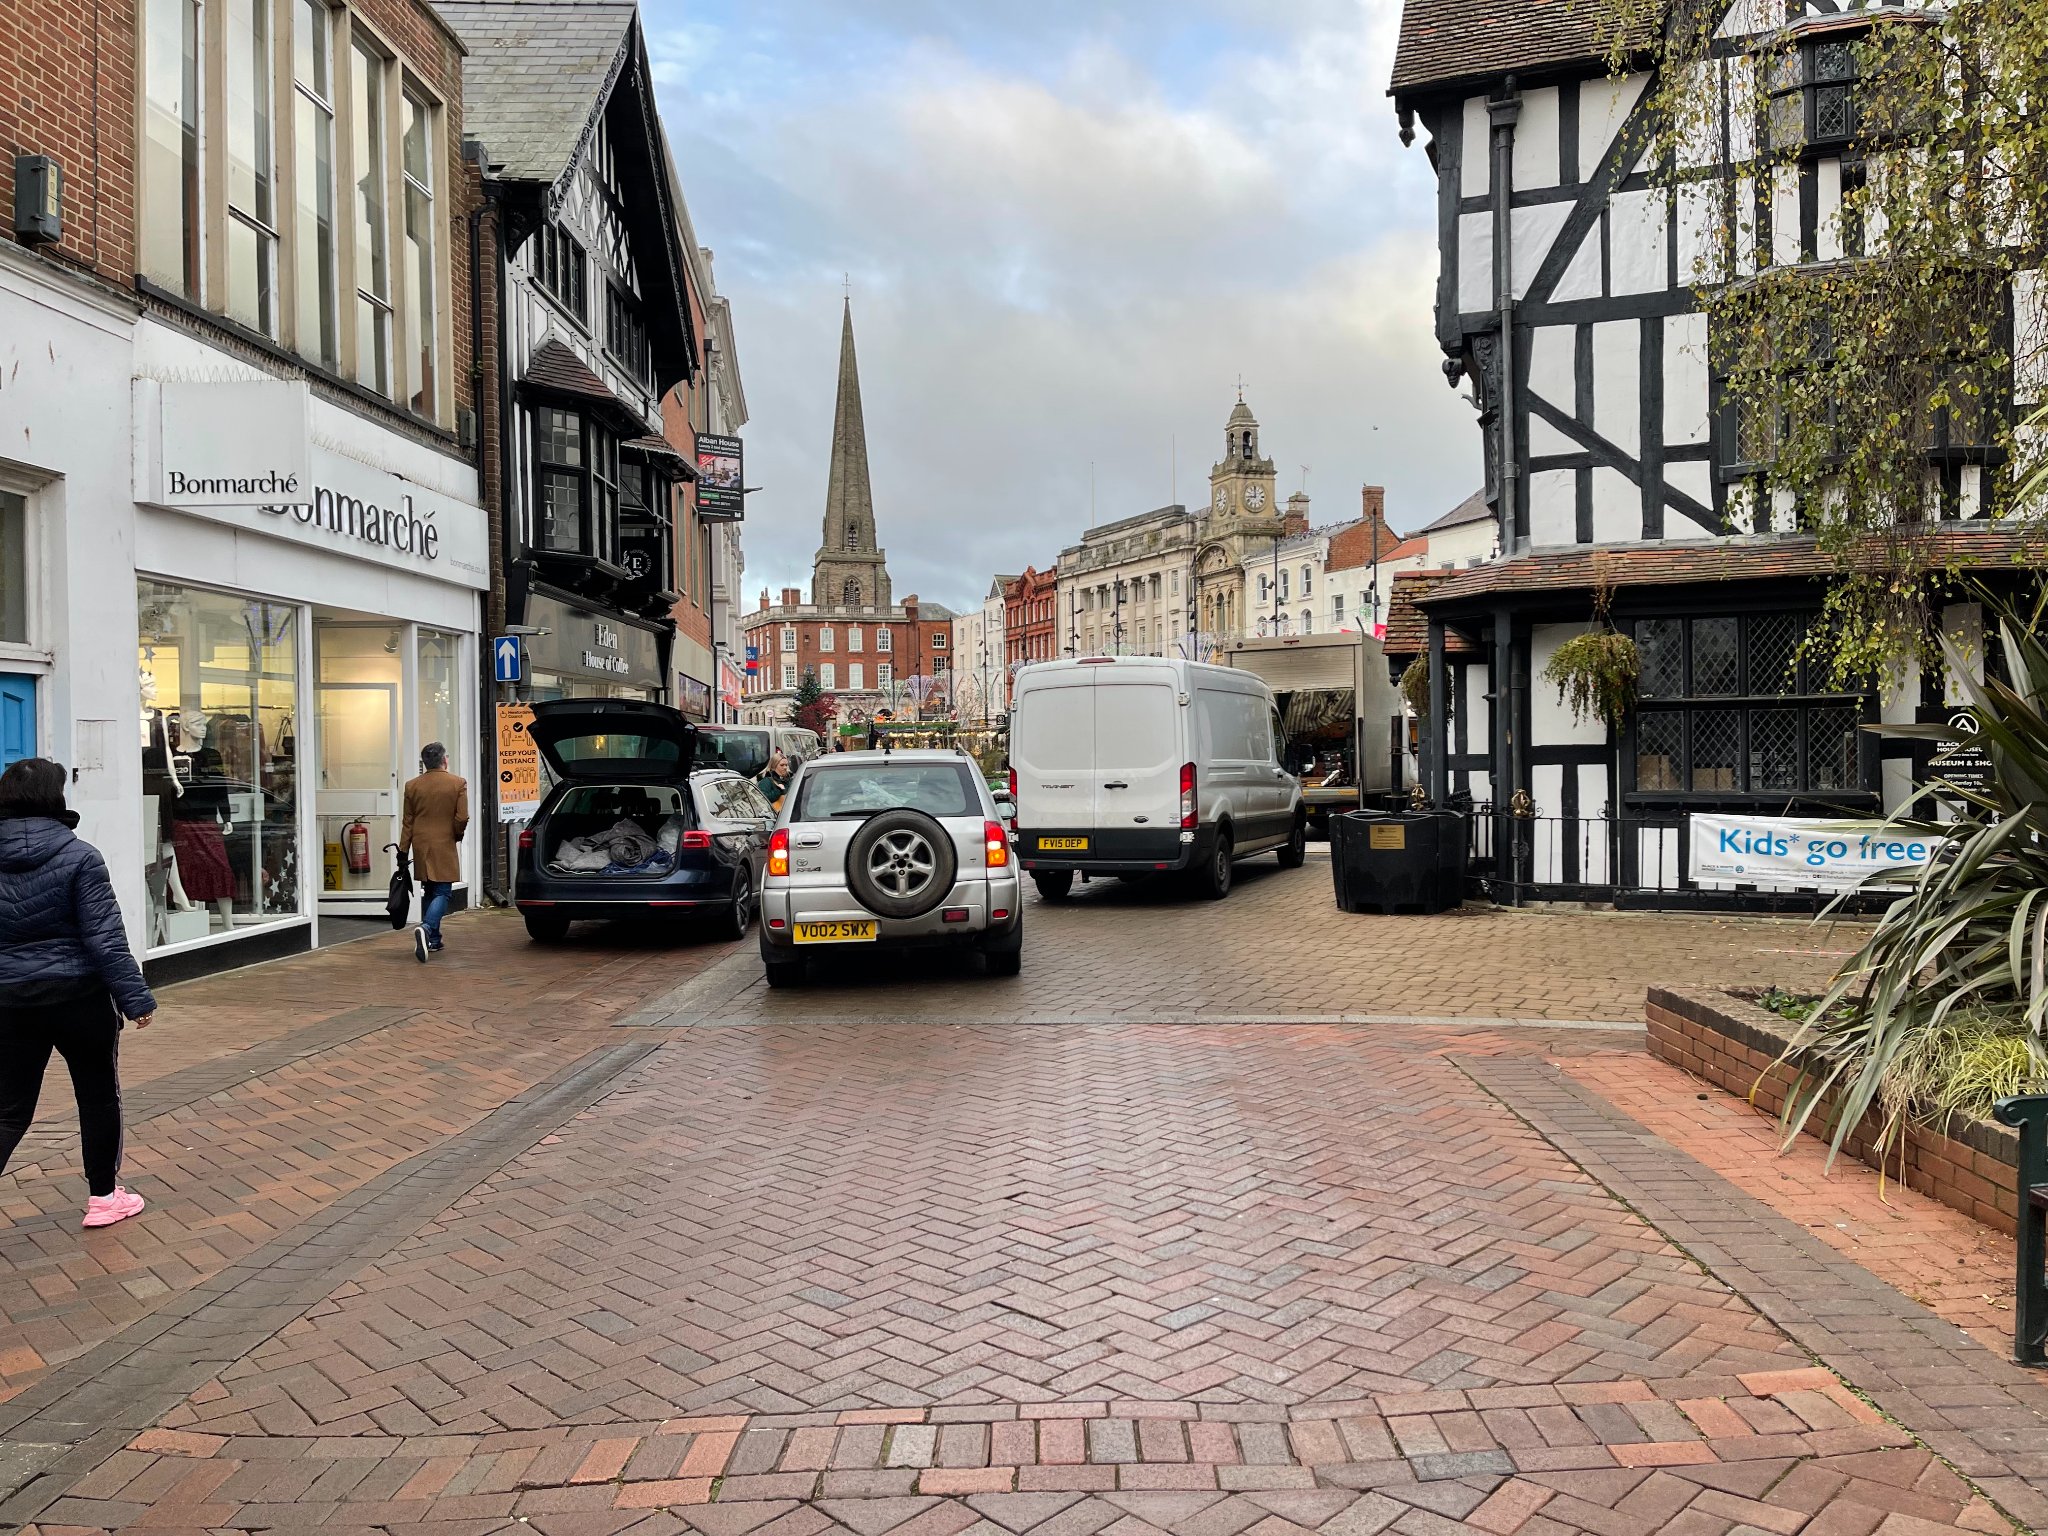 NEWS | Further delays to improvement works in St Peter’s Street frustrates city centre business owners